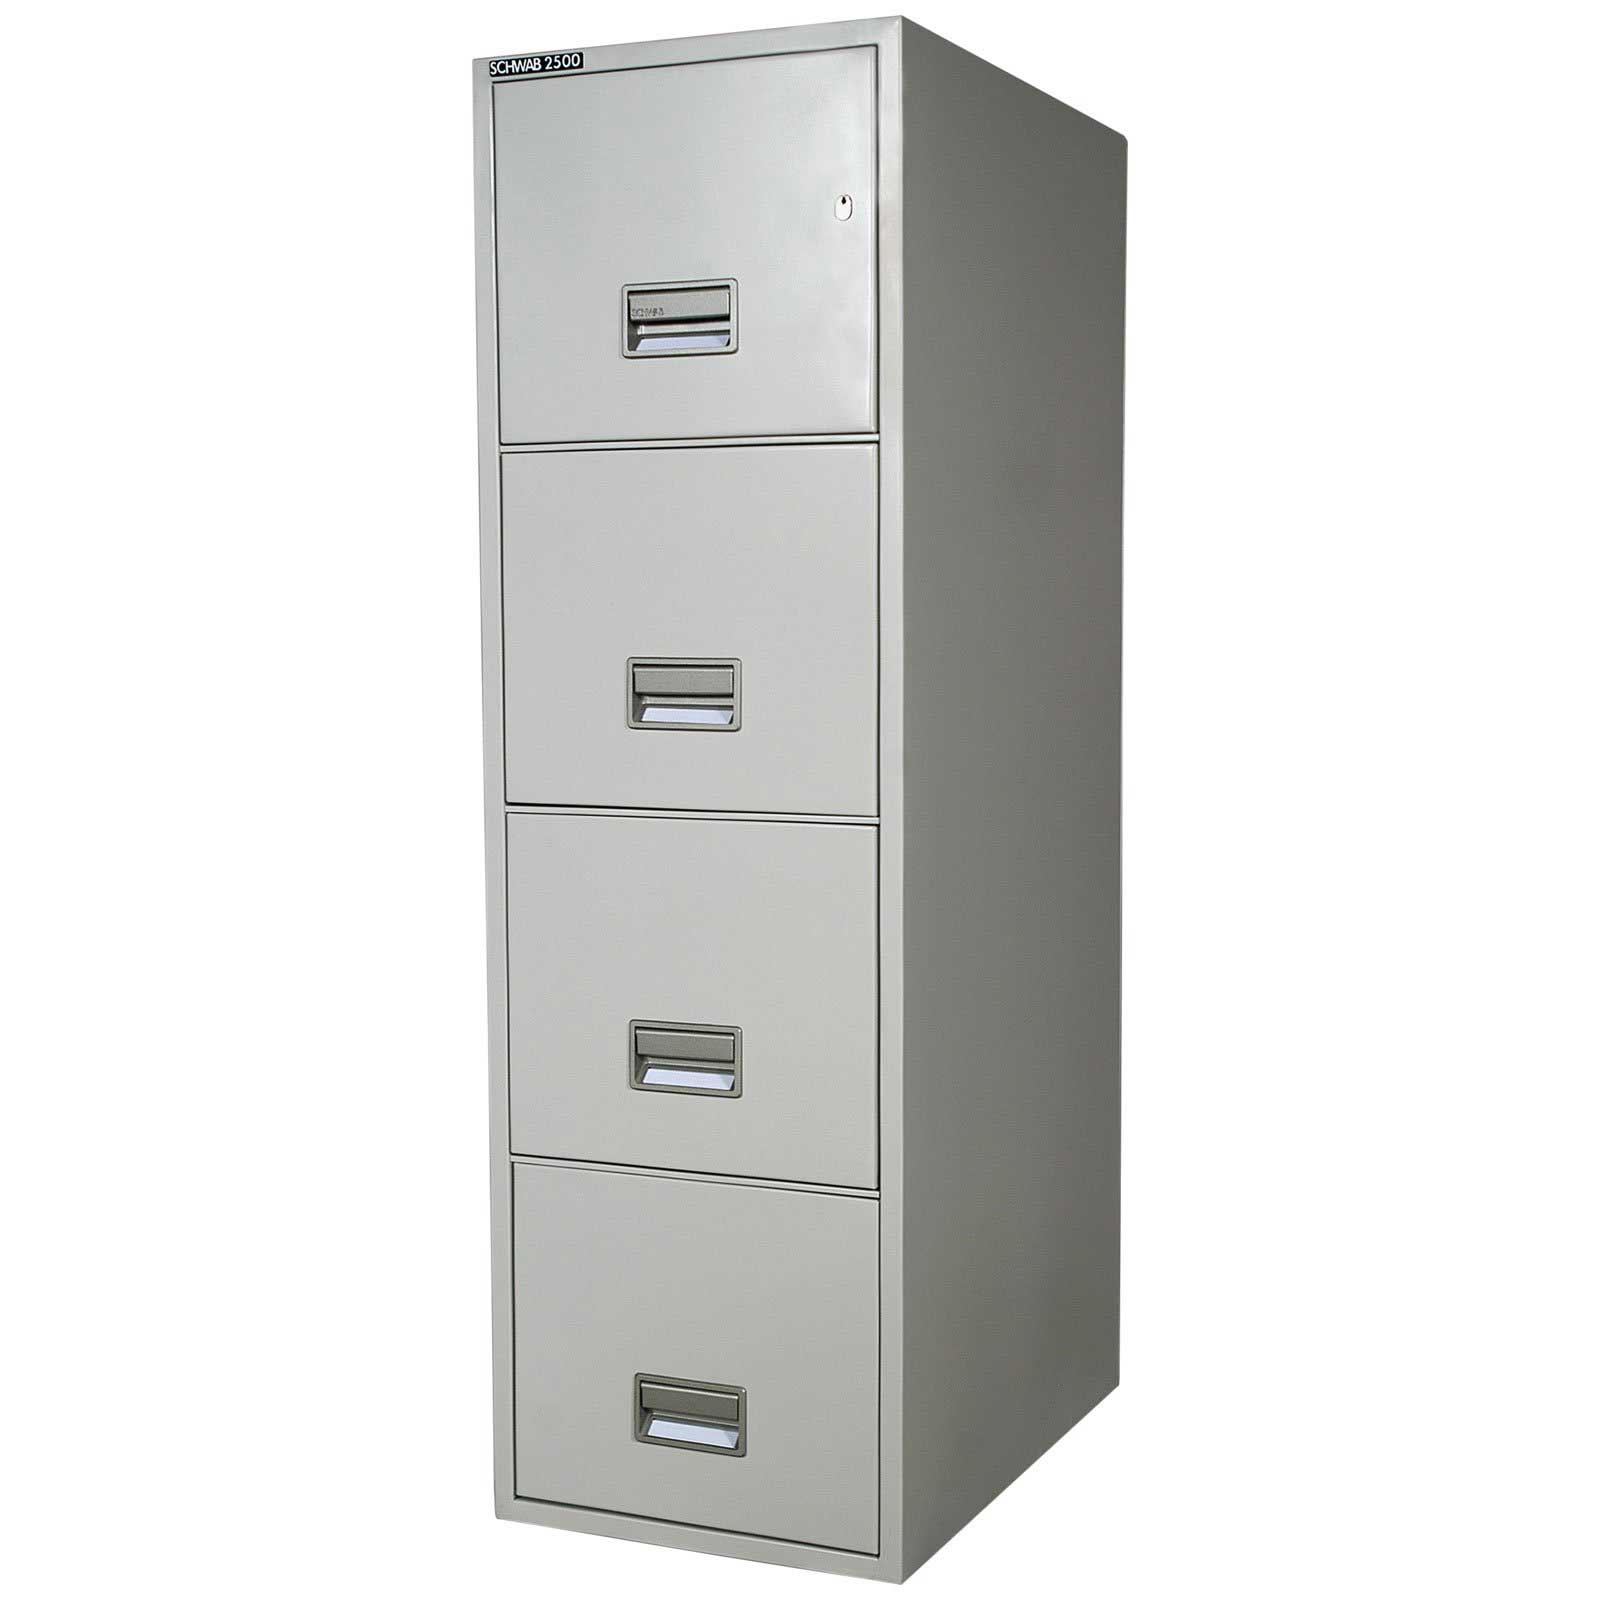 Image 60 of Steel Cabinets For Office